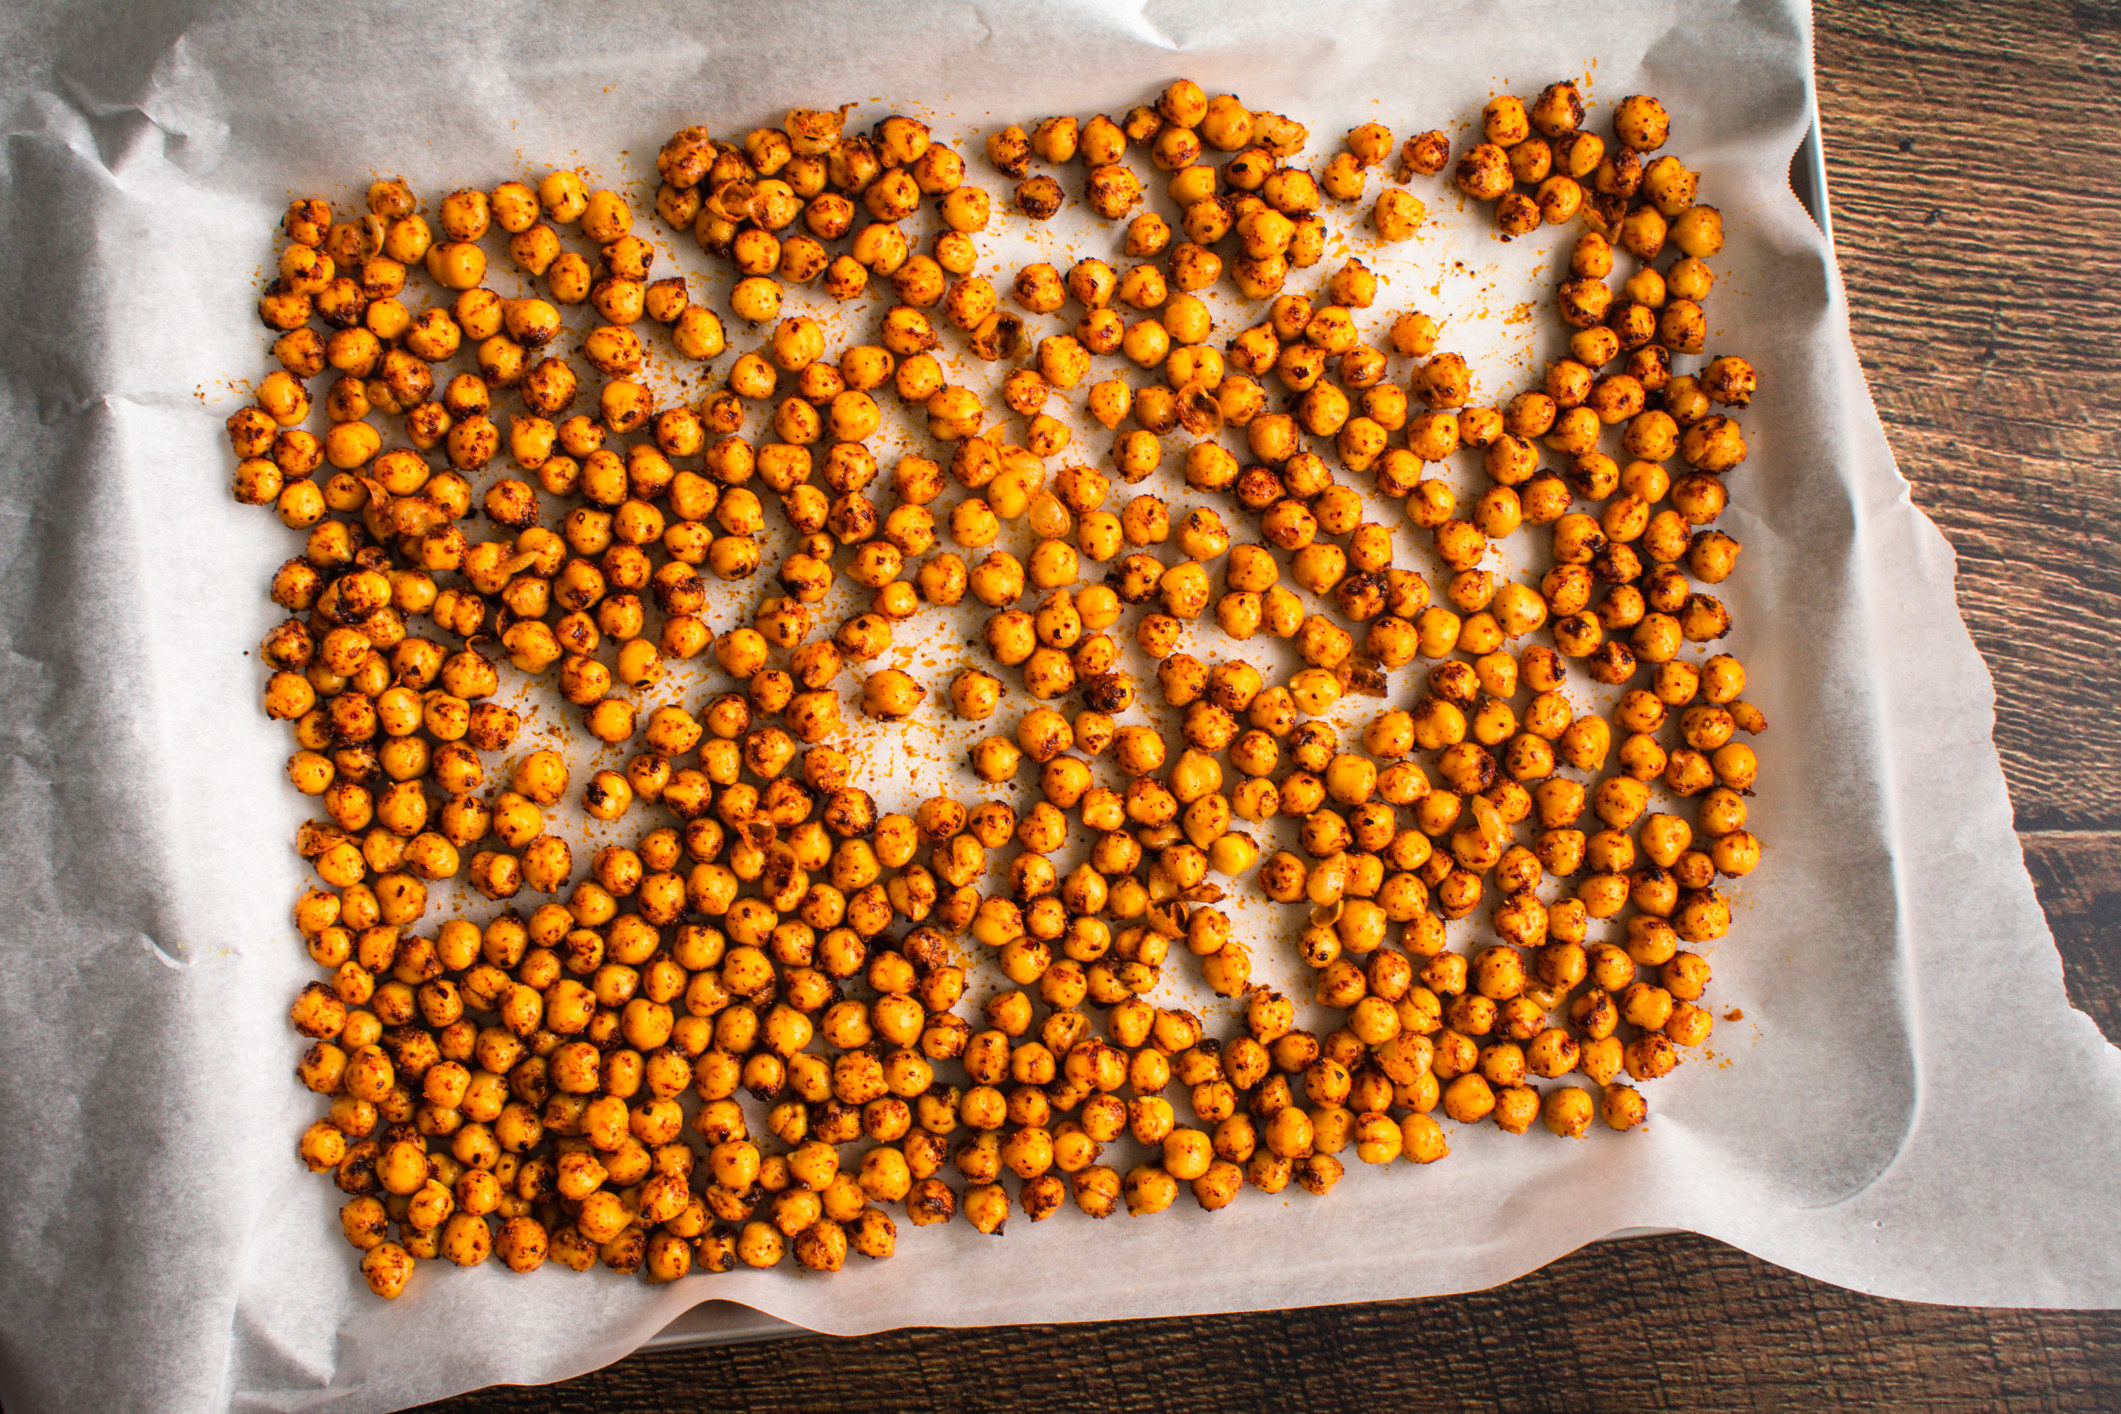 Roasted spiced chickpeas on parchment paper